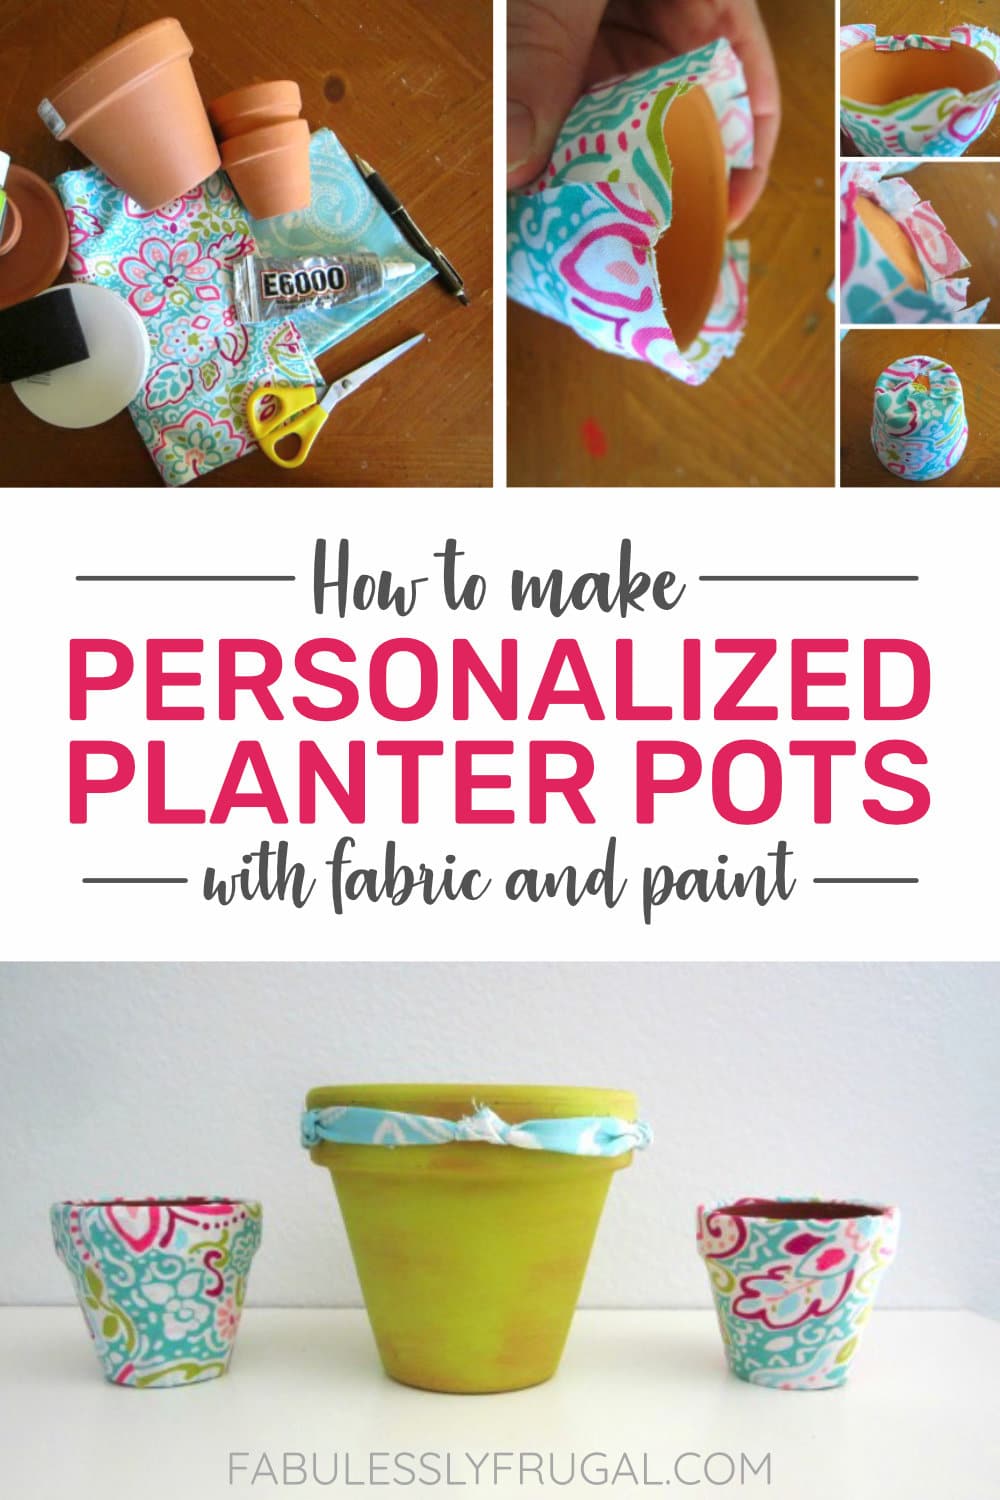 Painting terracotta pots to make personalized planter pots